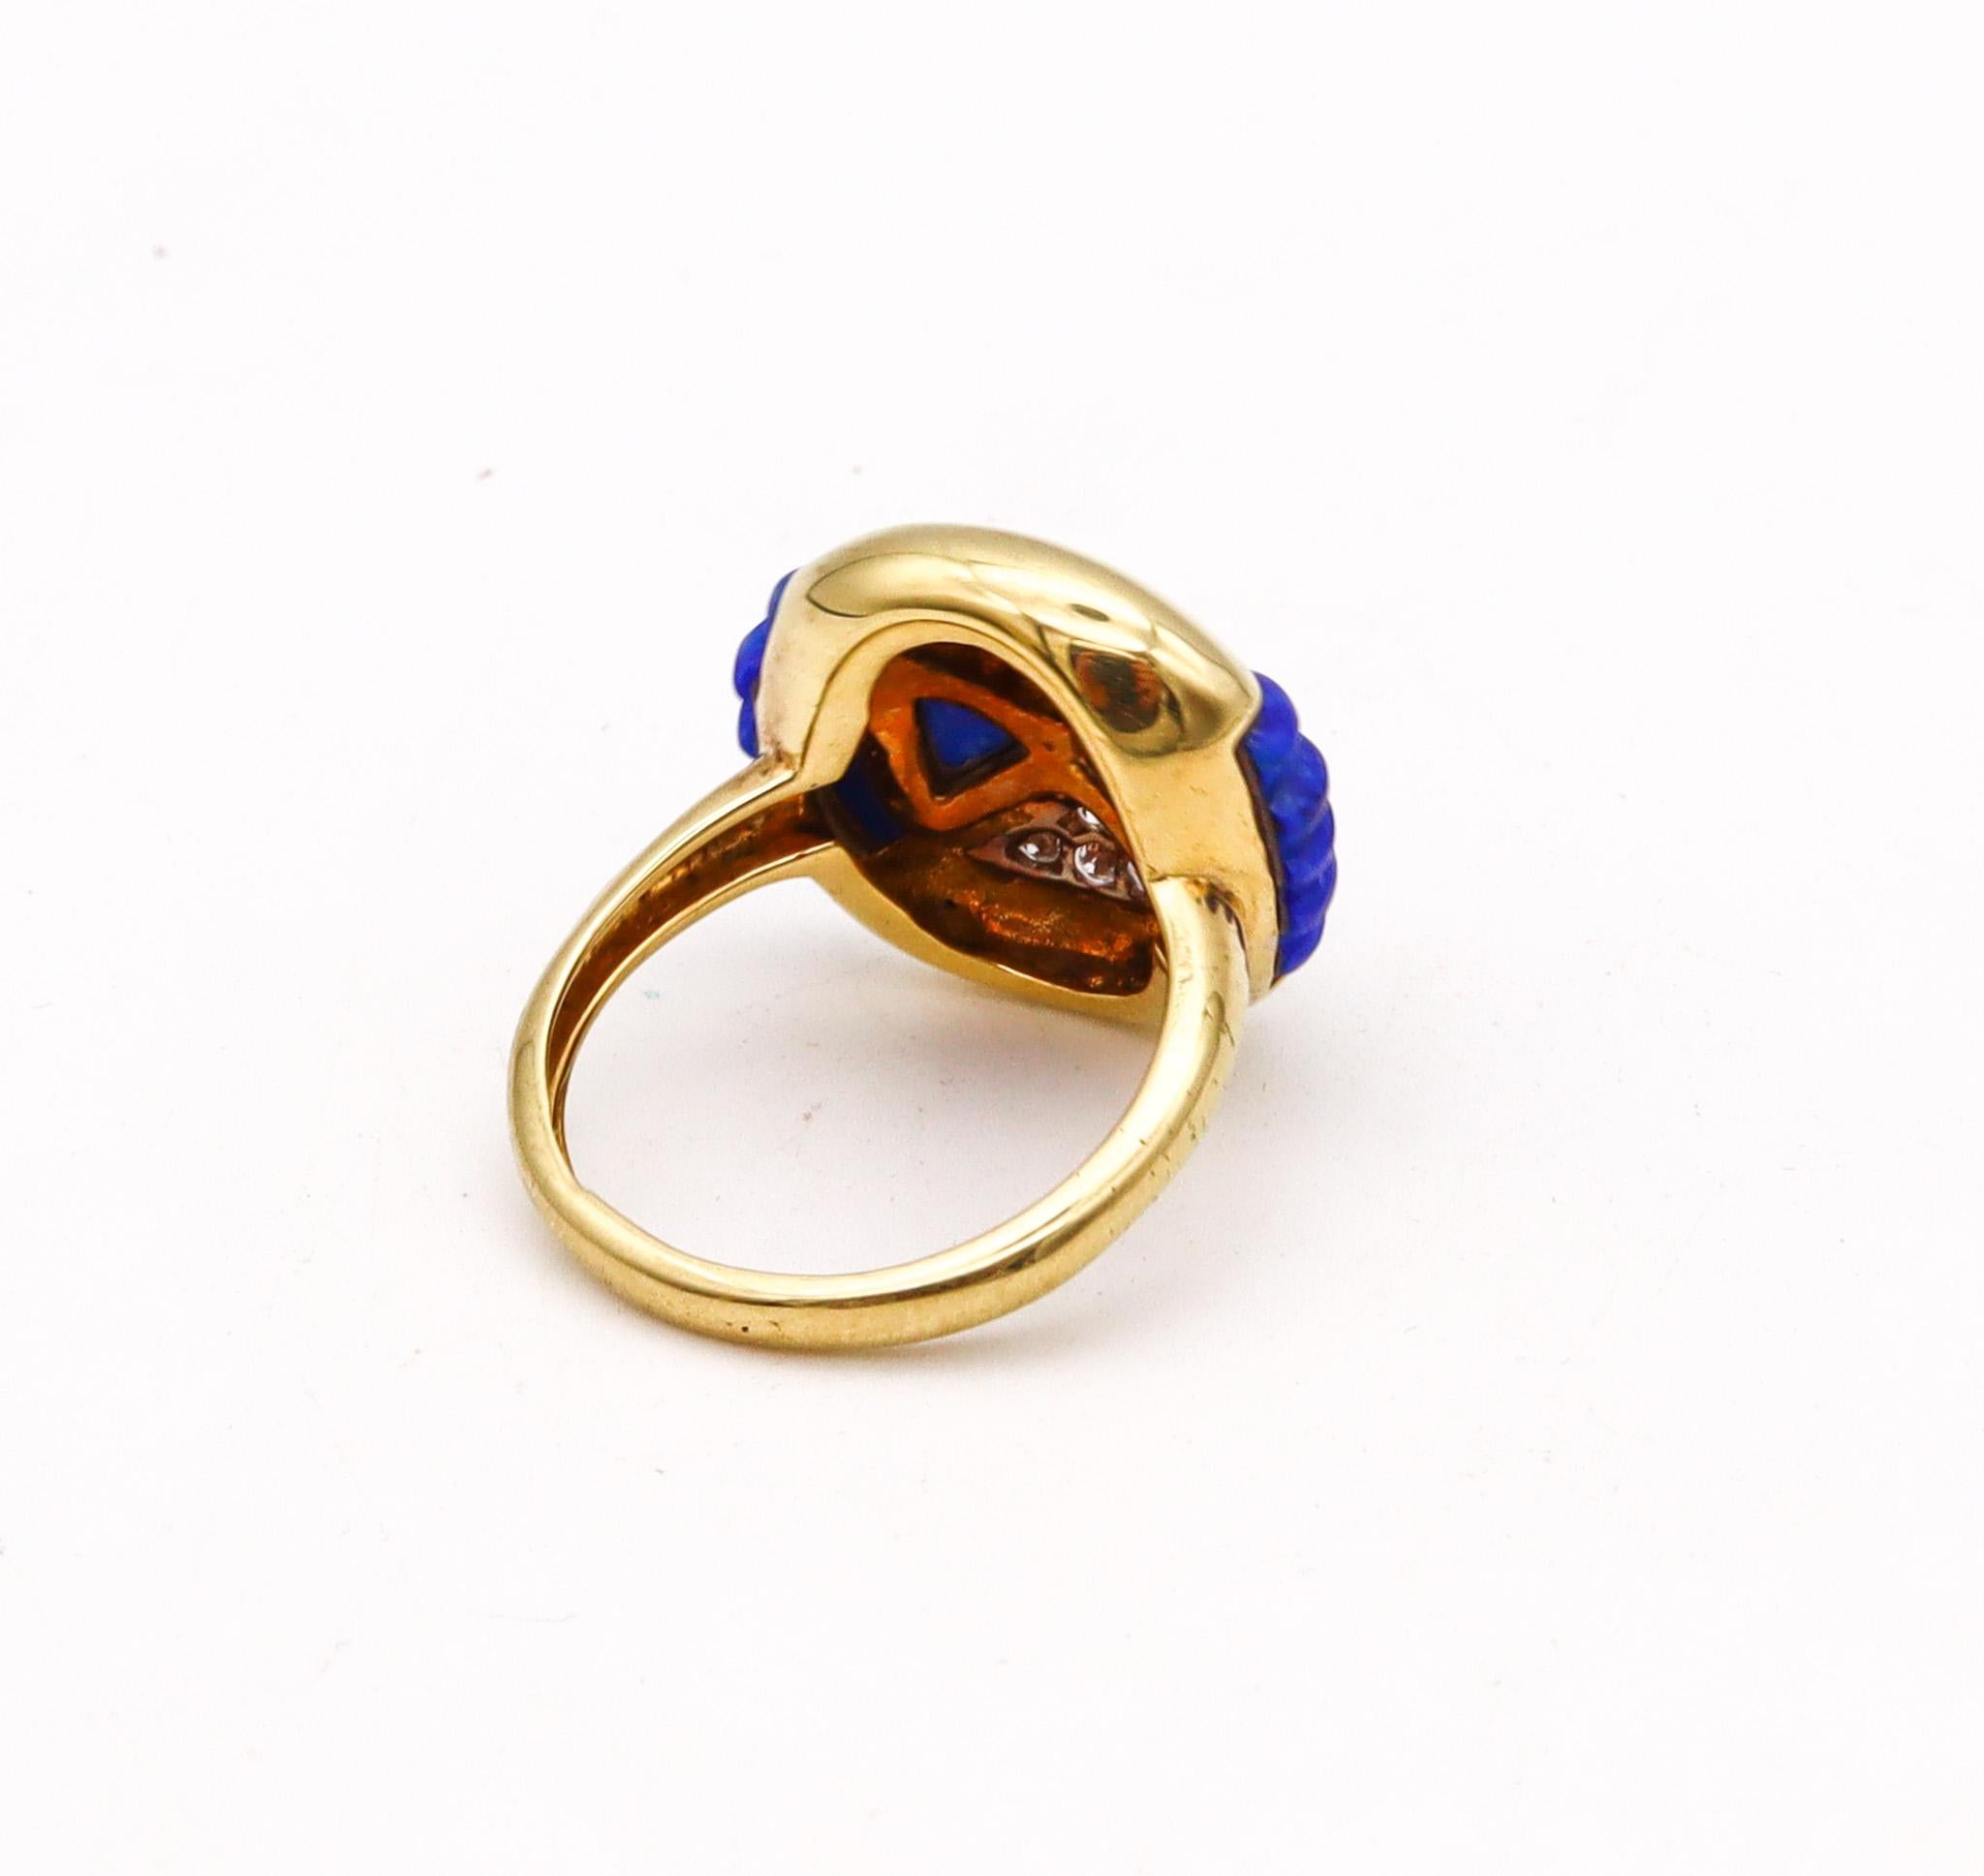 Modernist Sculptural Ring In 18Kt Yellow Gold With 3.24 Ctw Diamonds And Lapis In Excellent Condition For Sale In Miami, FL